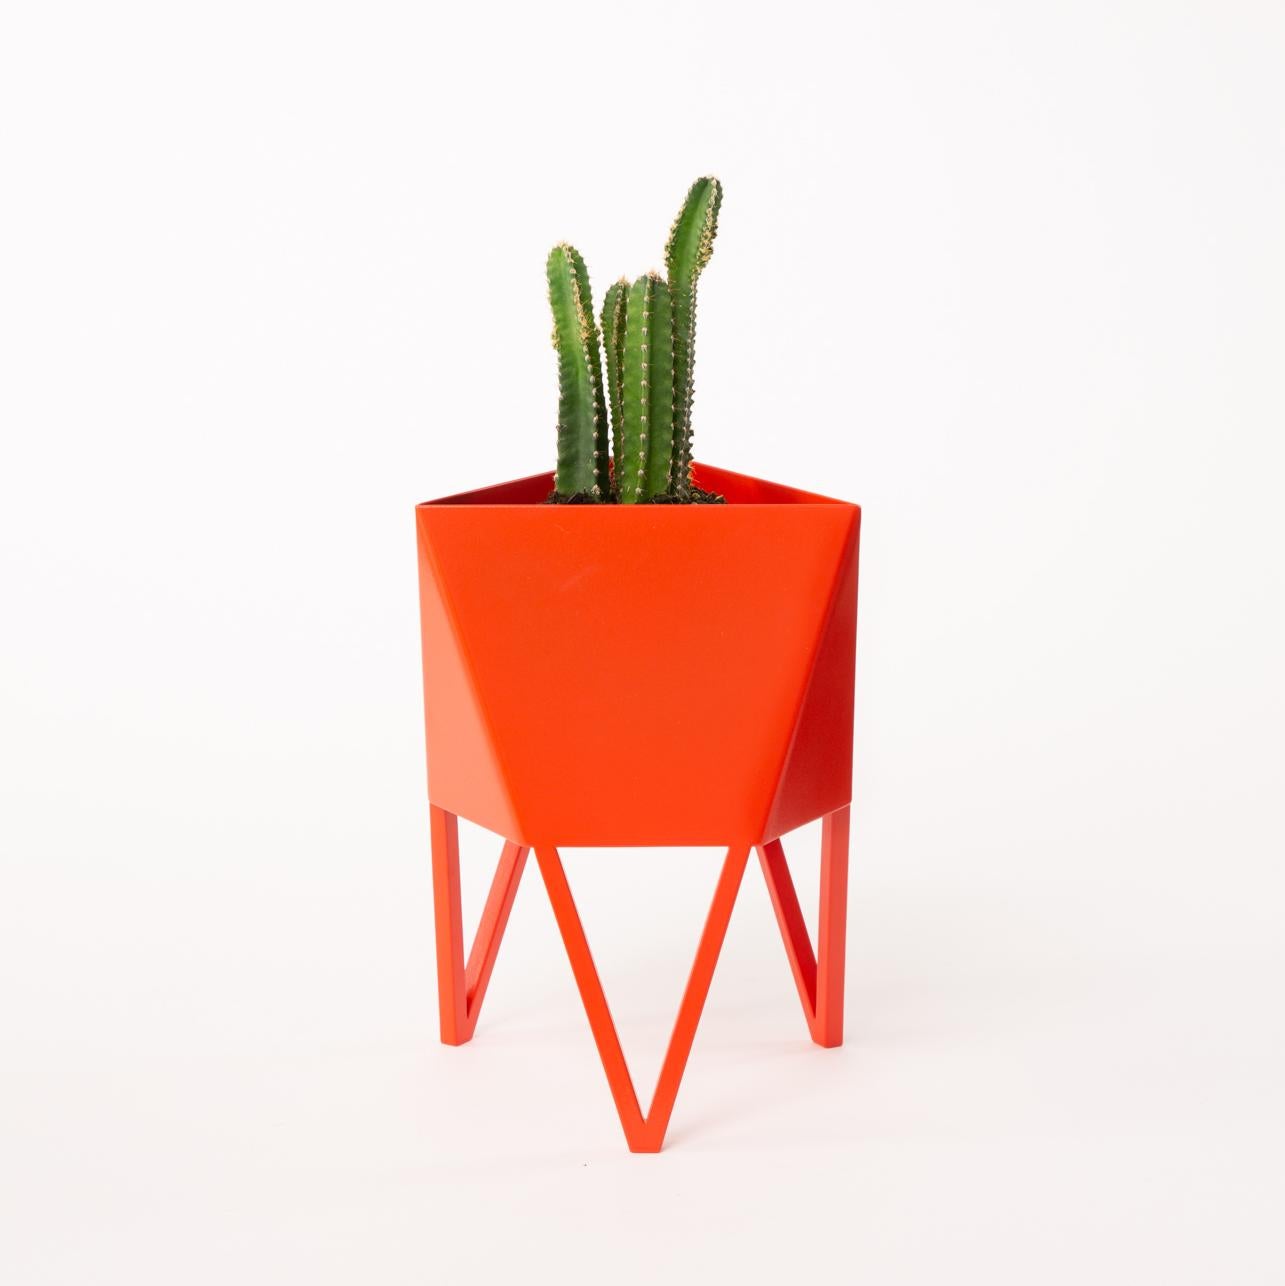 Faceted Deca Planter in Mars By Force/Collide, Size Mini, 2023 For Sale